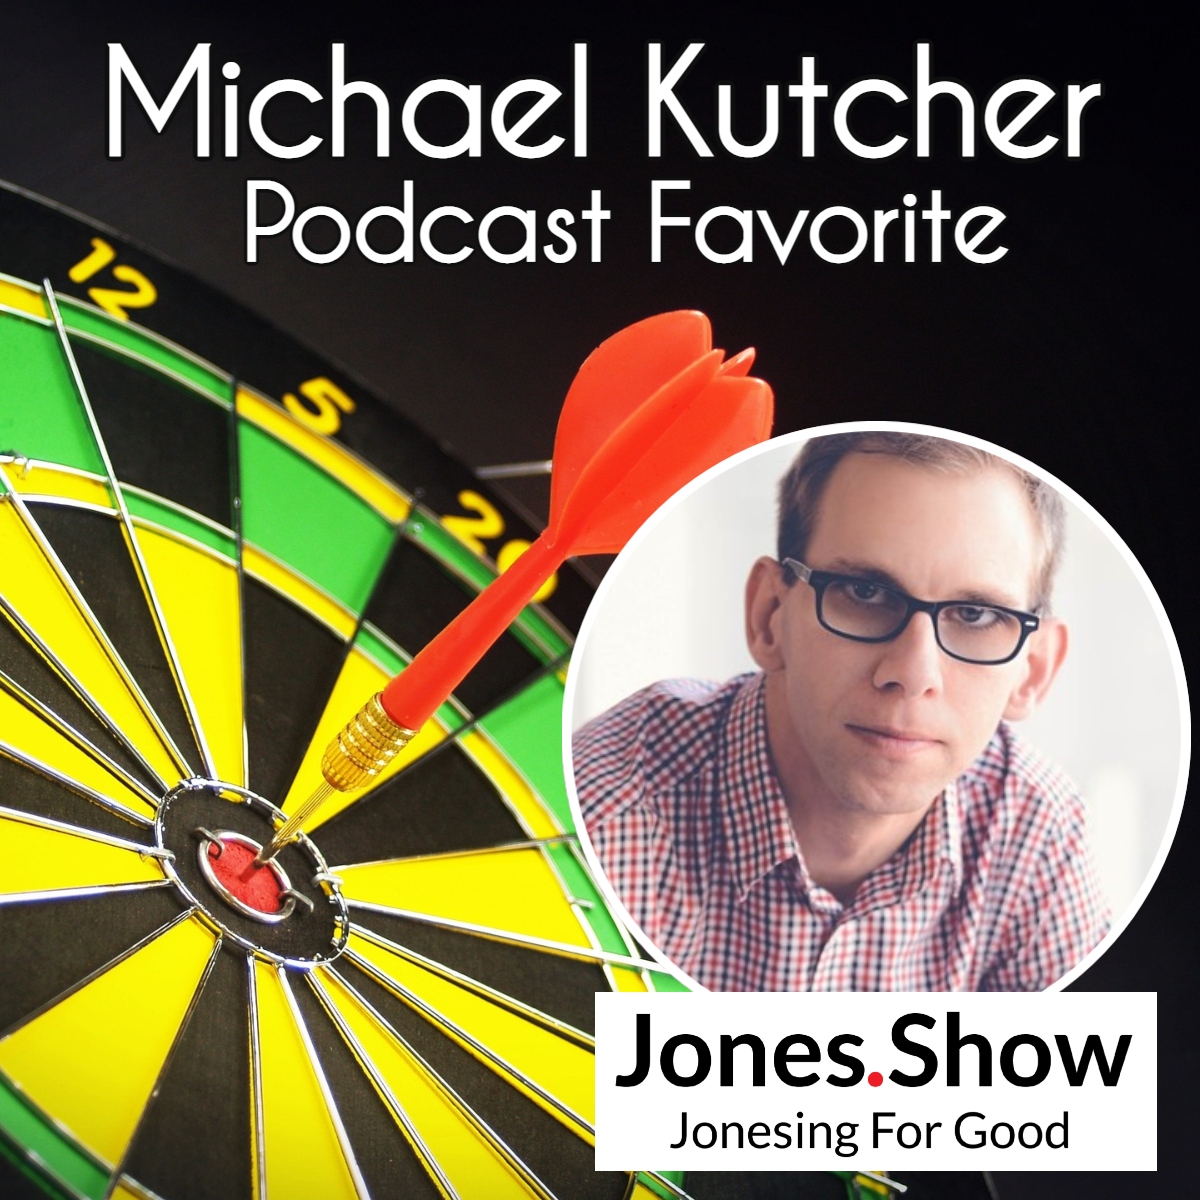 He's mega-talent #AshtonKutcher's twin brother; however, to me, #MichaelKutcher is the star of the family. His platform focused on #diffabilities #disabilities & #organdonors and his #articulate #passionate nature are an extraordinary gift.
LISTEN HERE: traffic.libsyn.com/jonesshow/Mich…